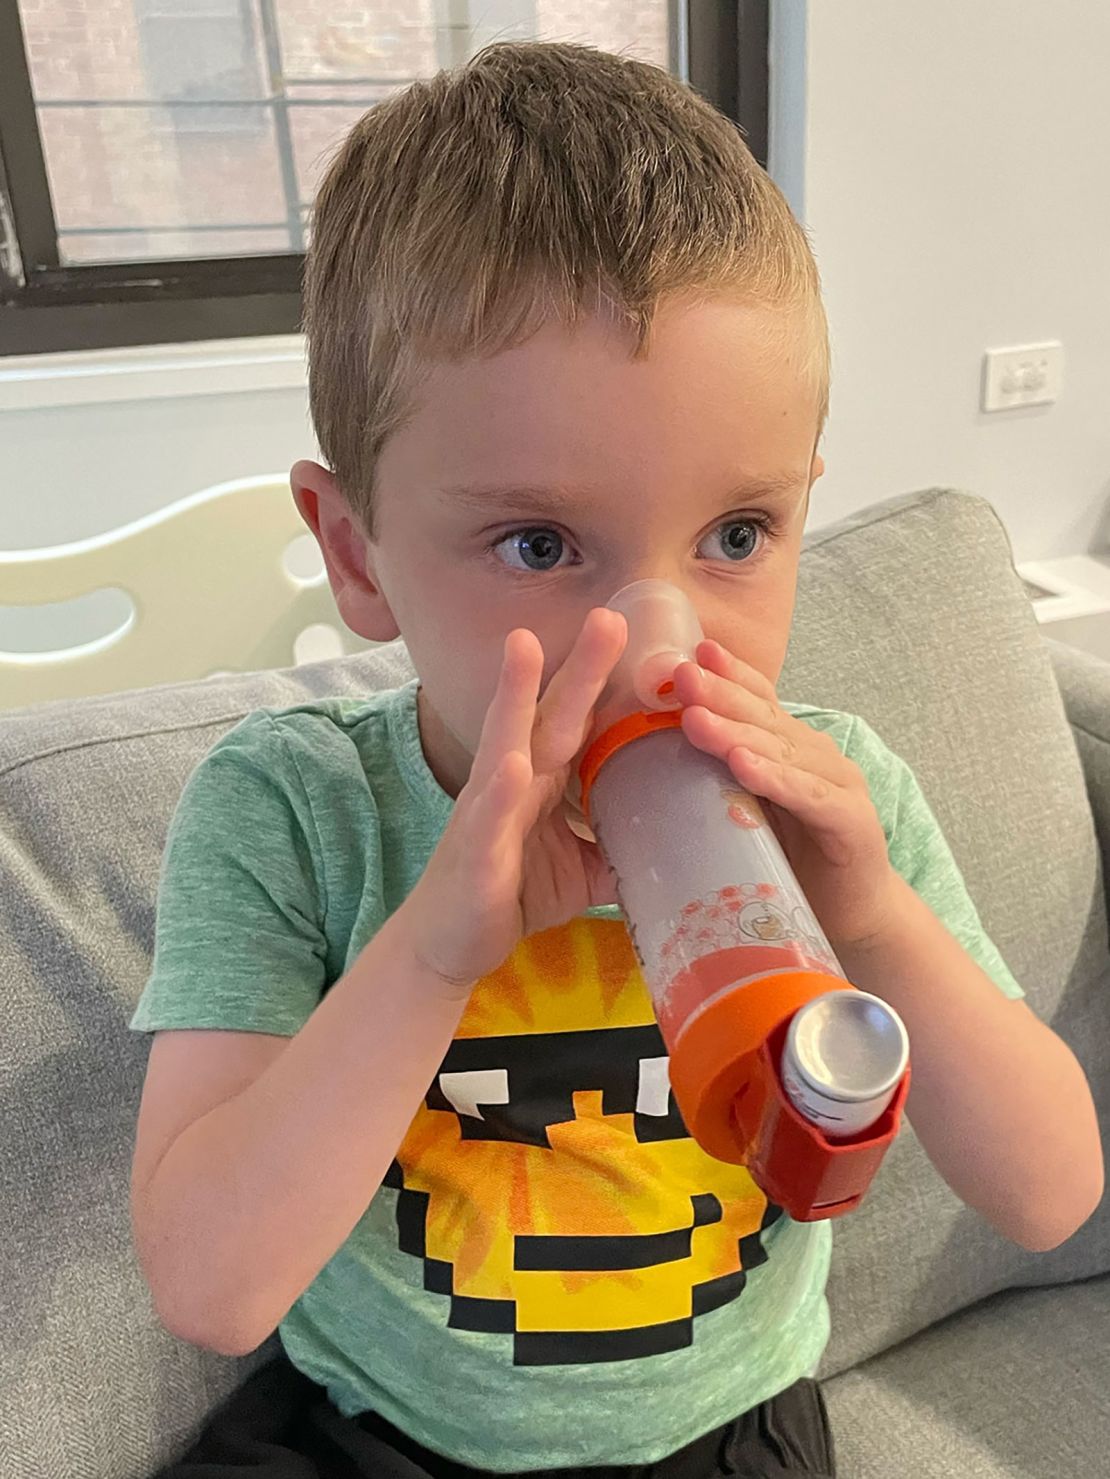 Bryce Cohen has asthma and wasn't able to make an easy switch to the new generic of the medicine Flovent, his mother said.